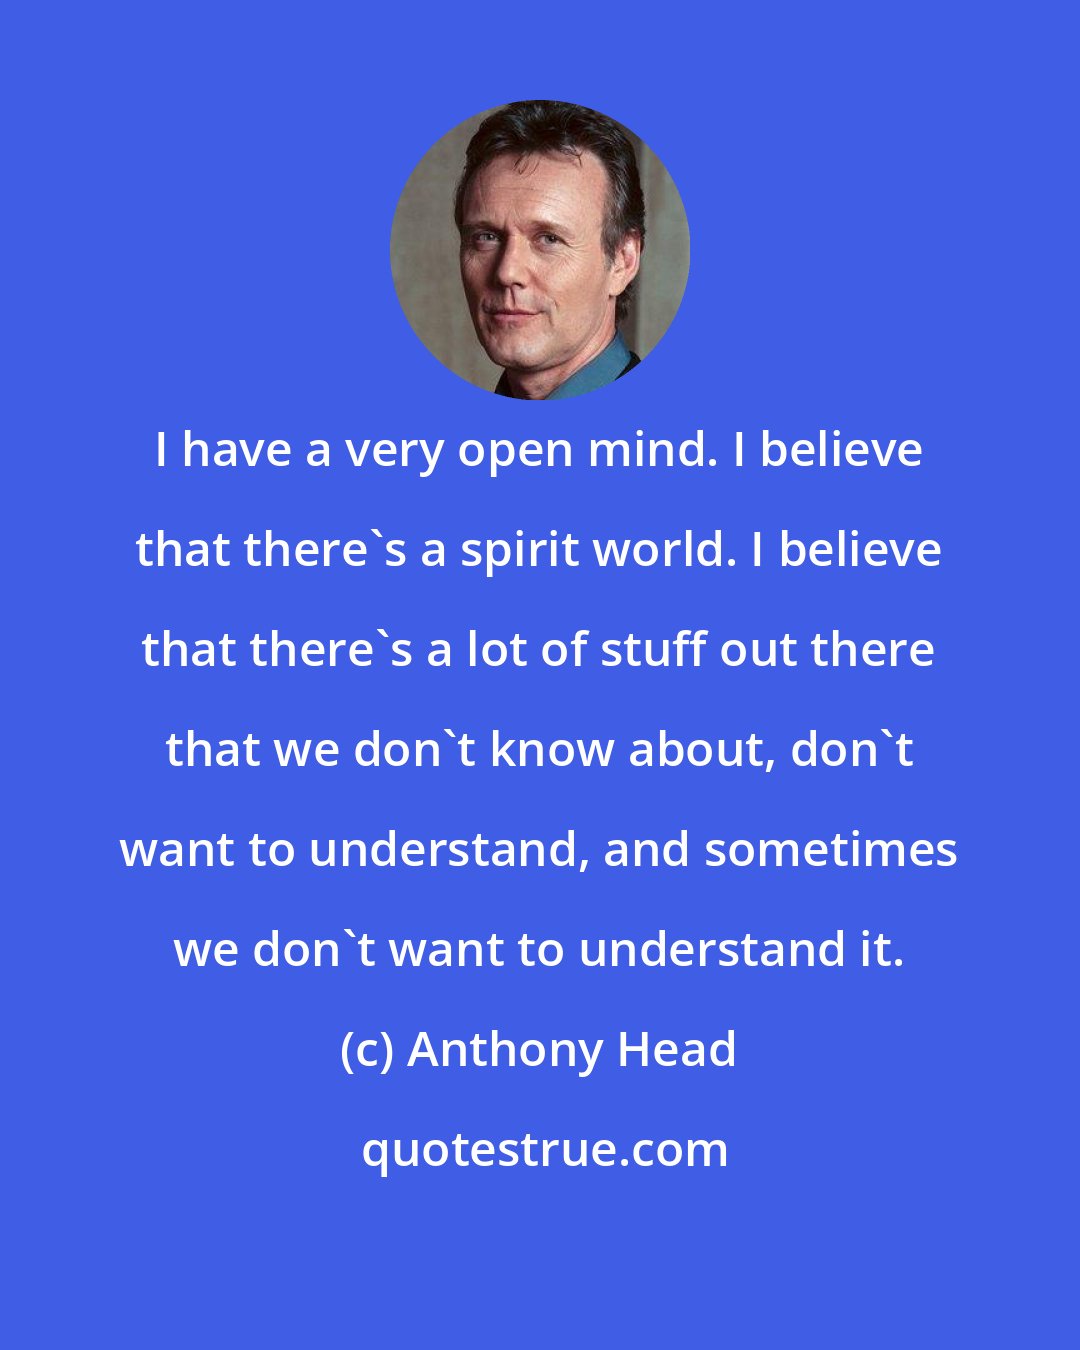 Anthony Head: I have a very open mind. I believe that there's a spirit world. I believe that there's a lot of stuff out there that we don't know about, don't want to understand, and sometimes we don't want to understand it.